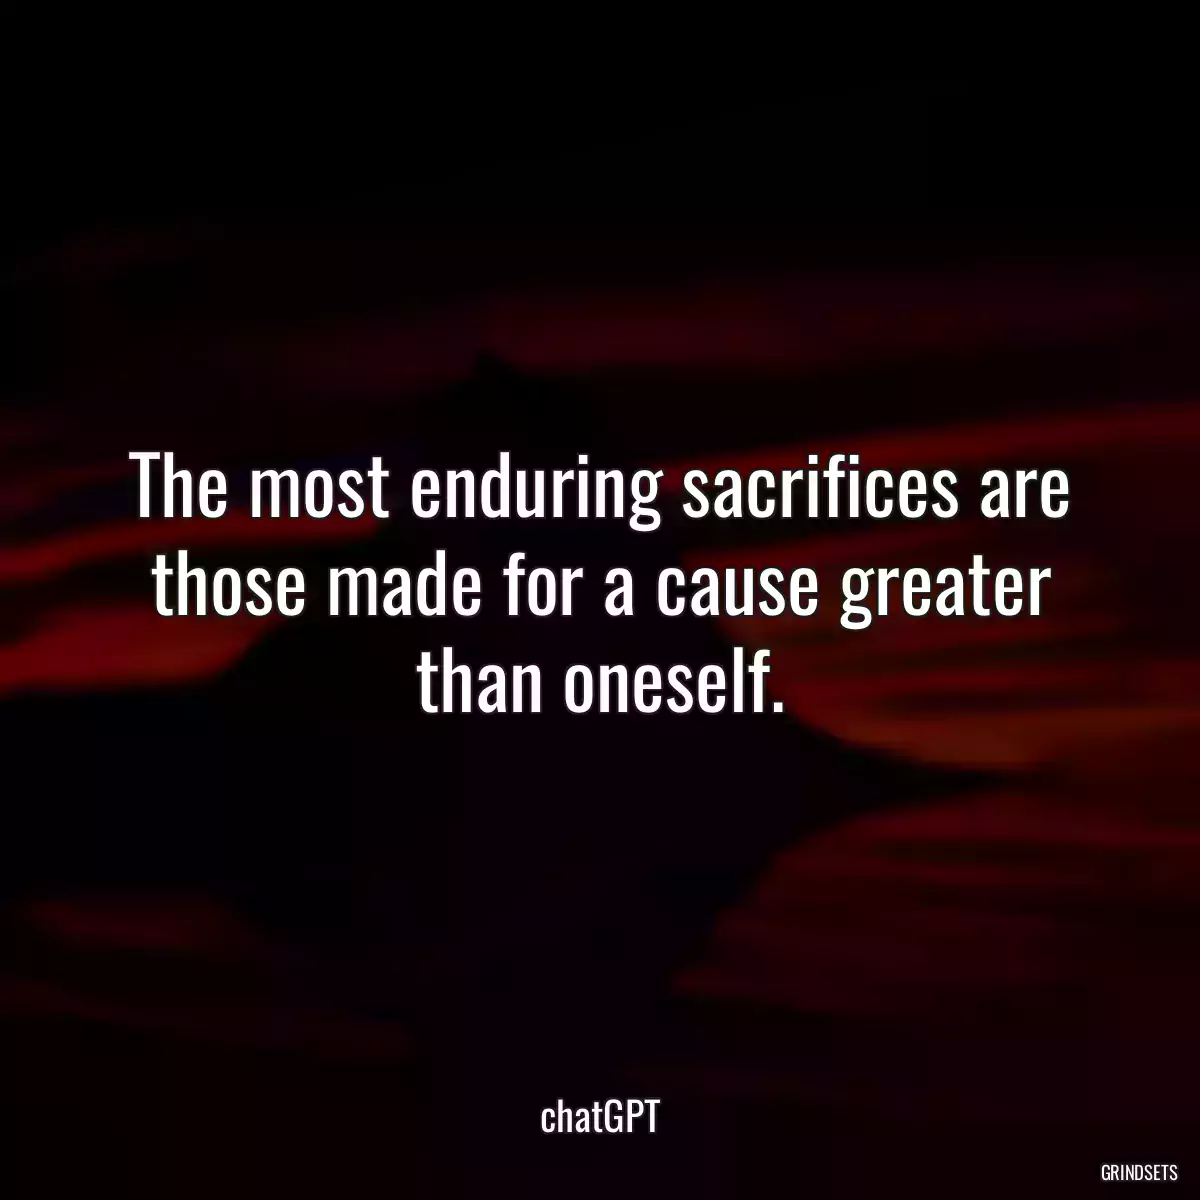 The most enduring sacrifices are those made for a cause greater than oneself.